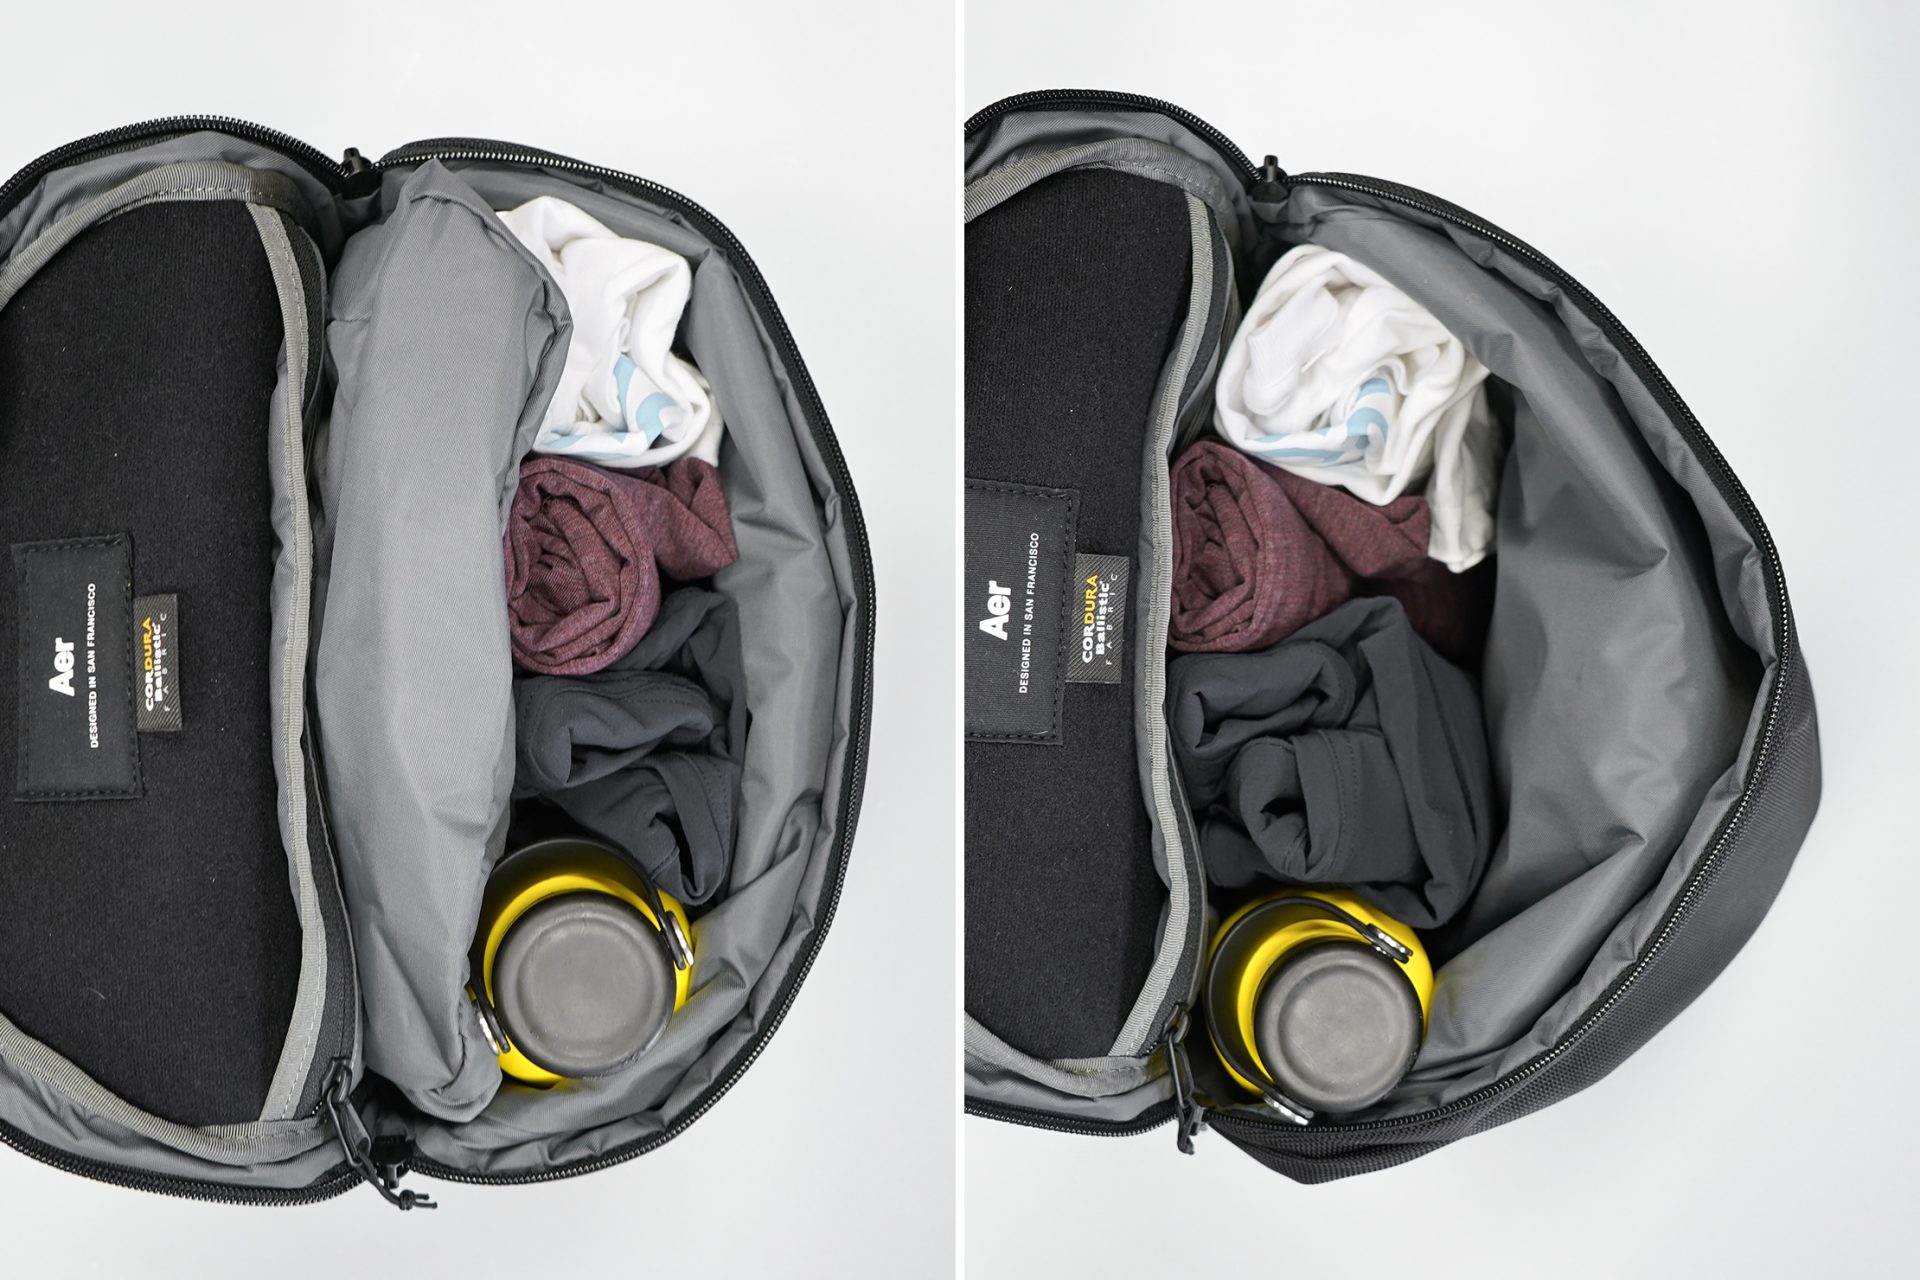 Aer Sling Bag 3 main compartment